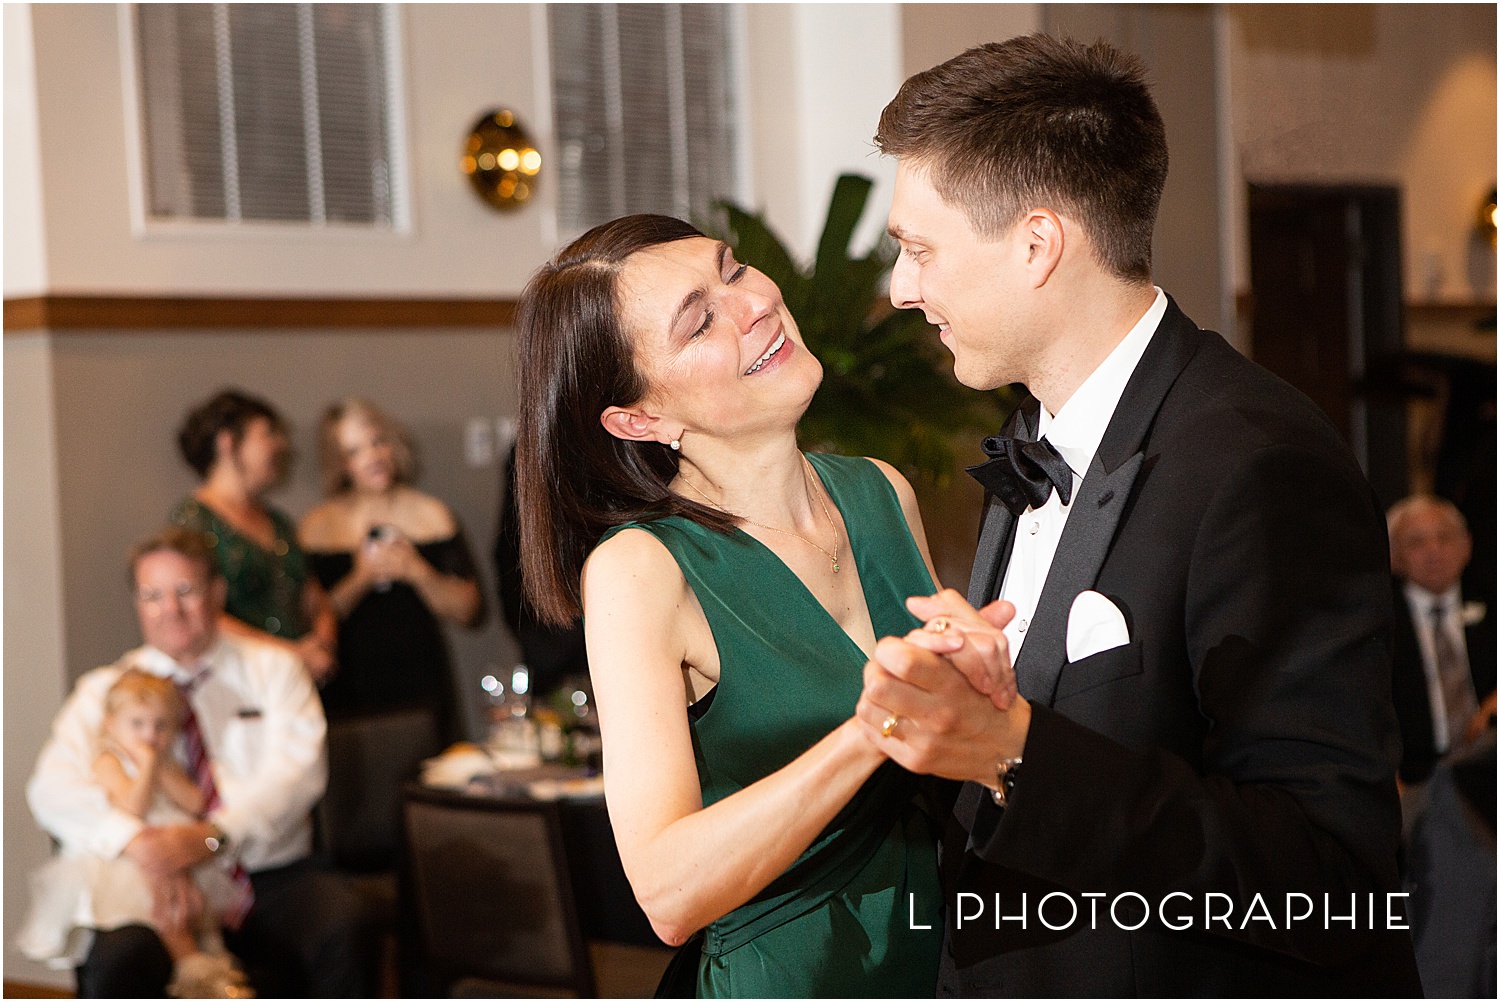 L Photographie St. Louis wedding photography The Last Hotel_0054.jpg